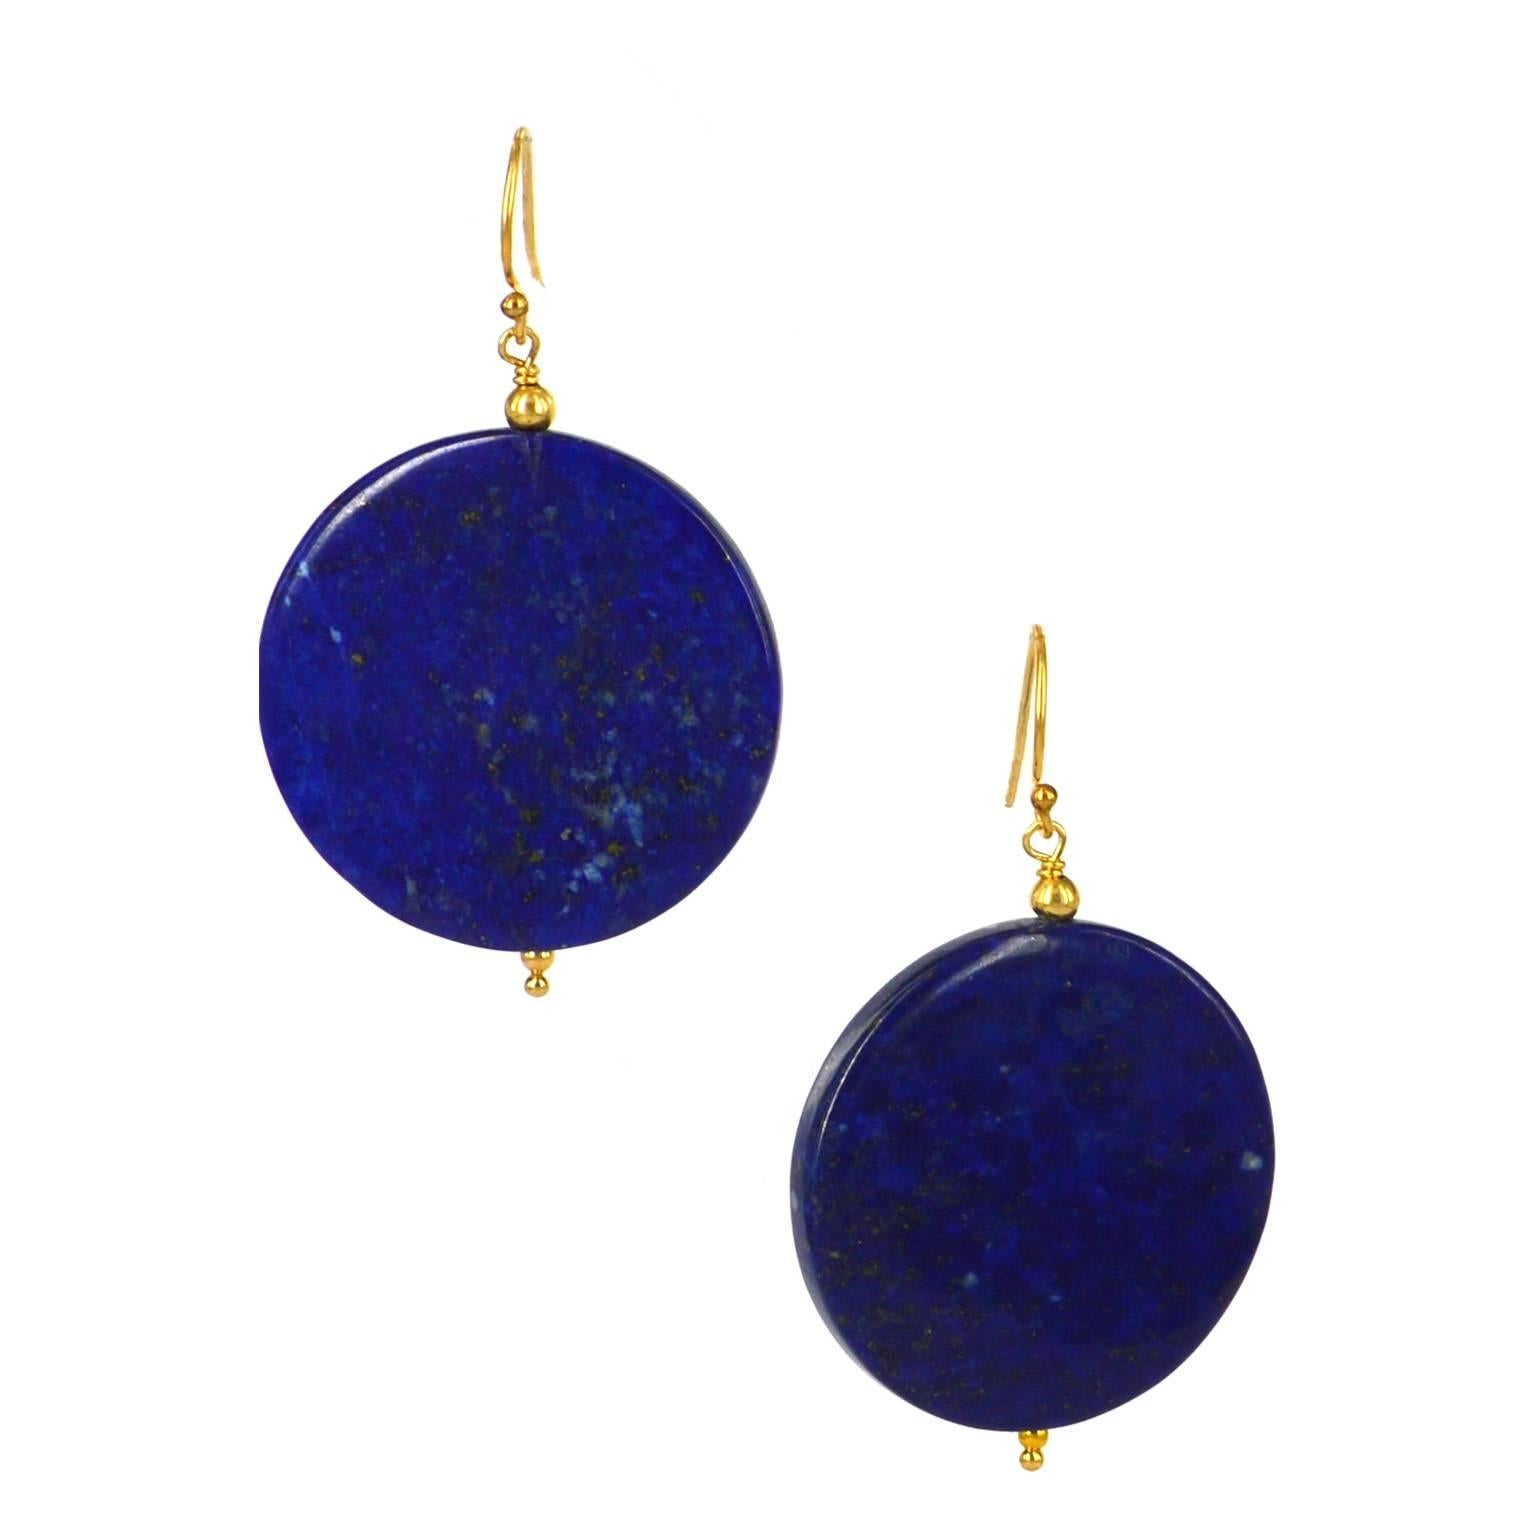 Natural polished Lapis Lazuli disk earrings with 14k gold filled sheppard hooks.
30mm disk
